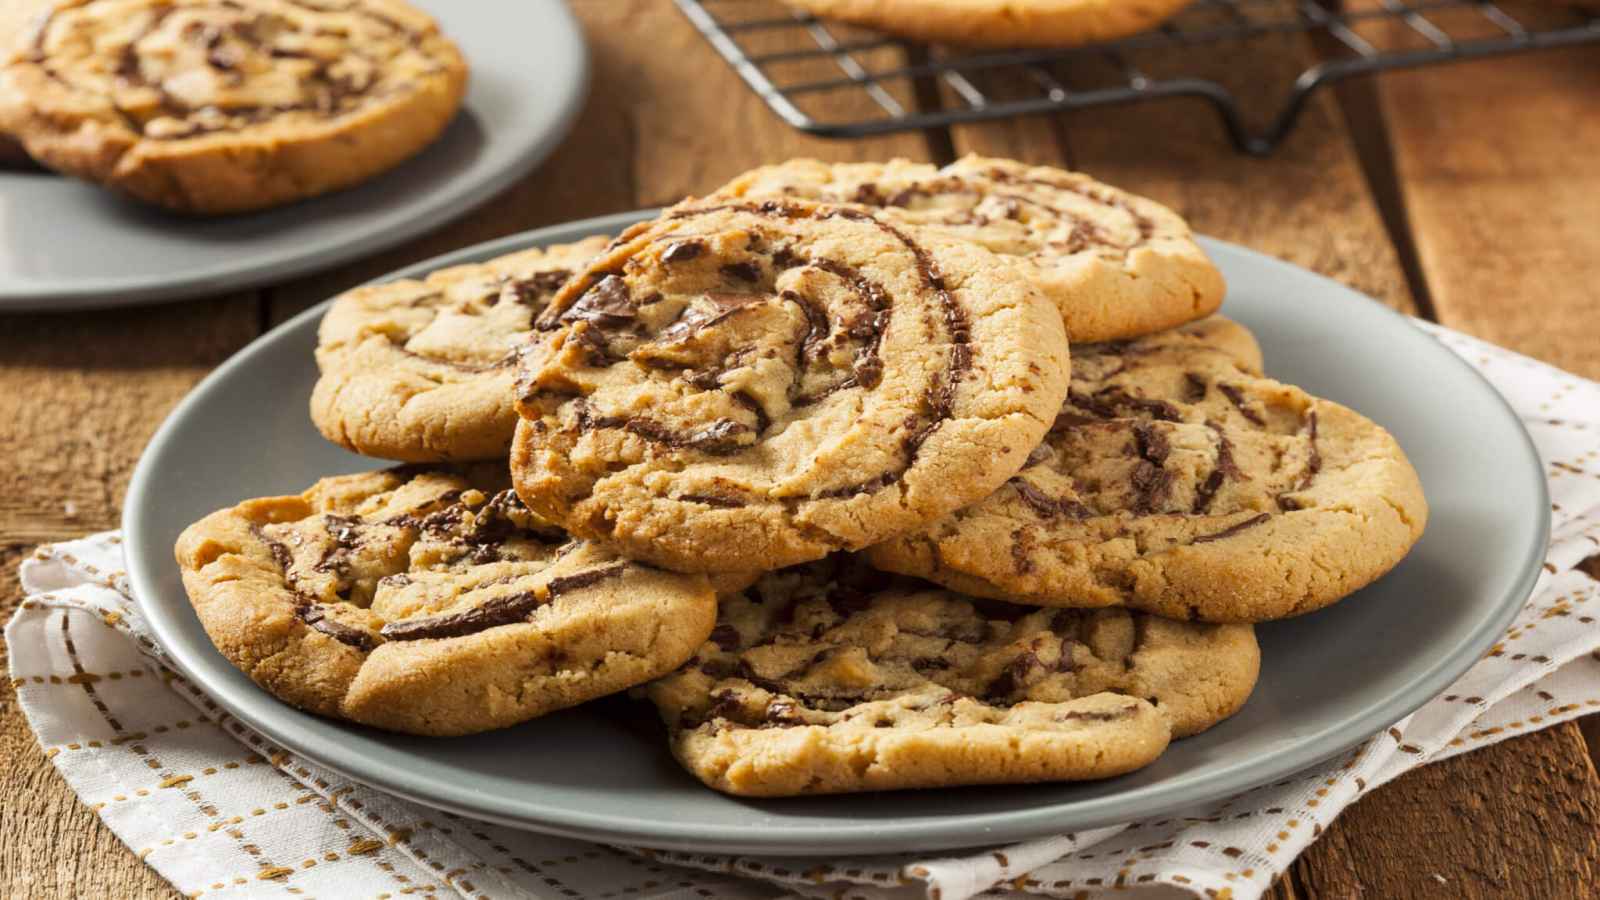 National Peanut Butter Cookie Day 2023: Date, History, Facts about Peanut Butter